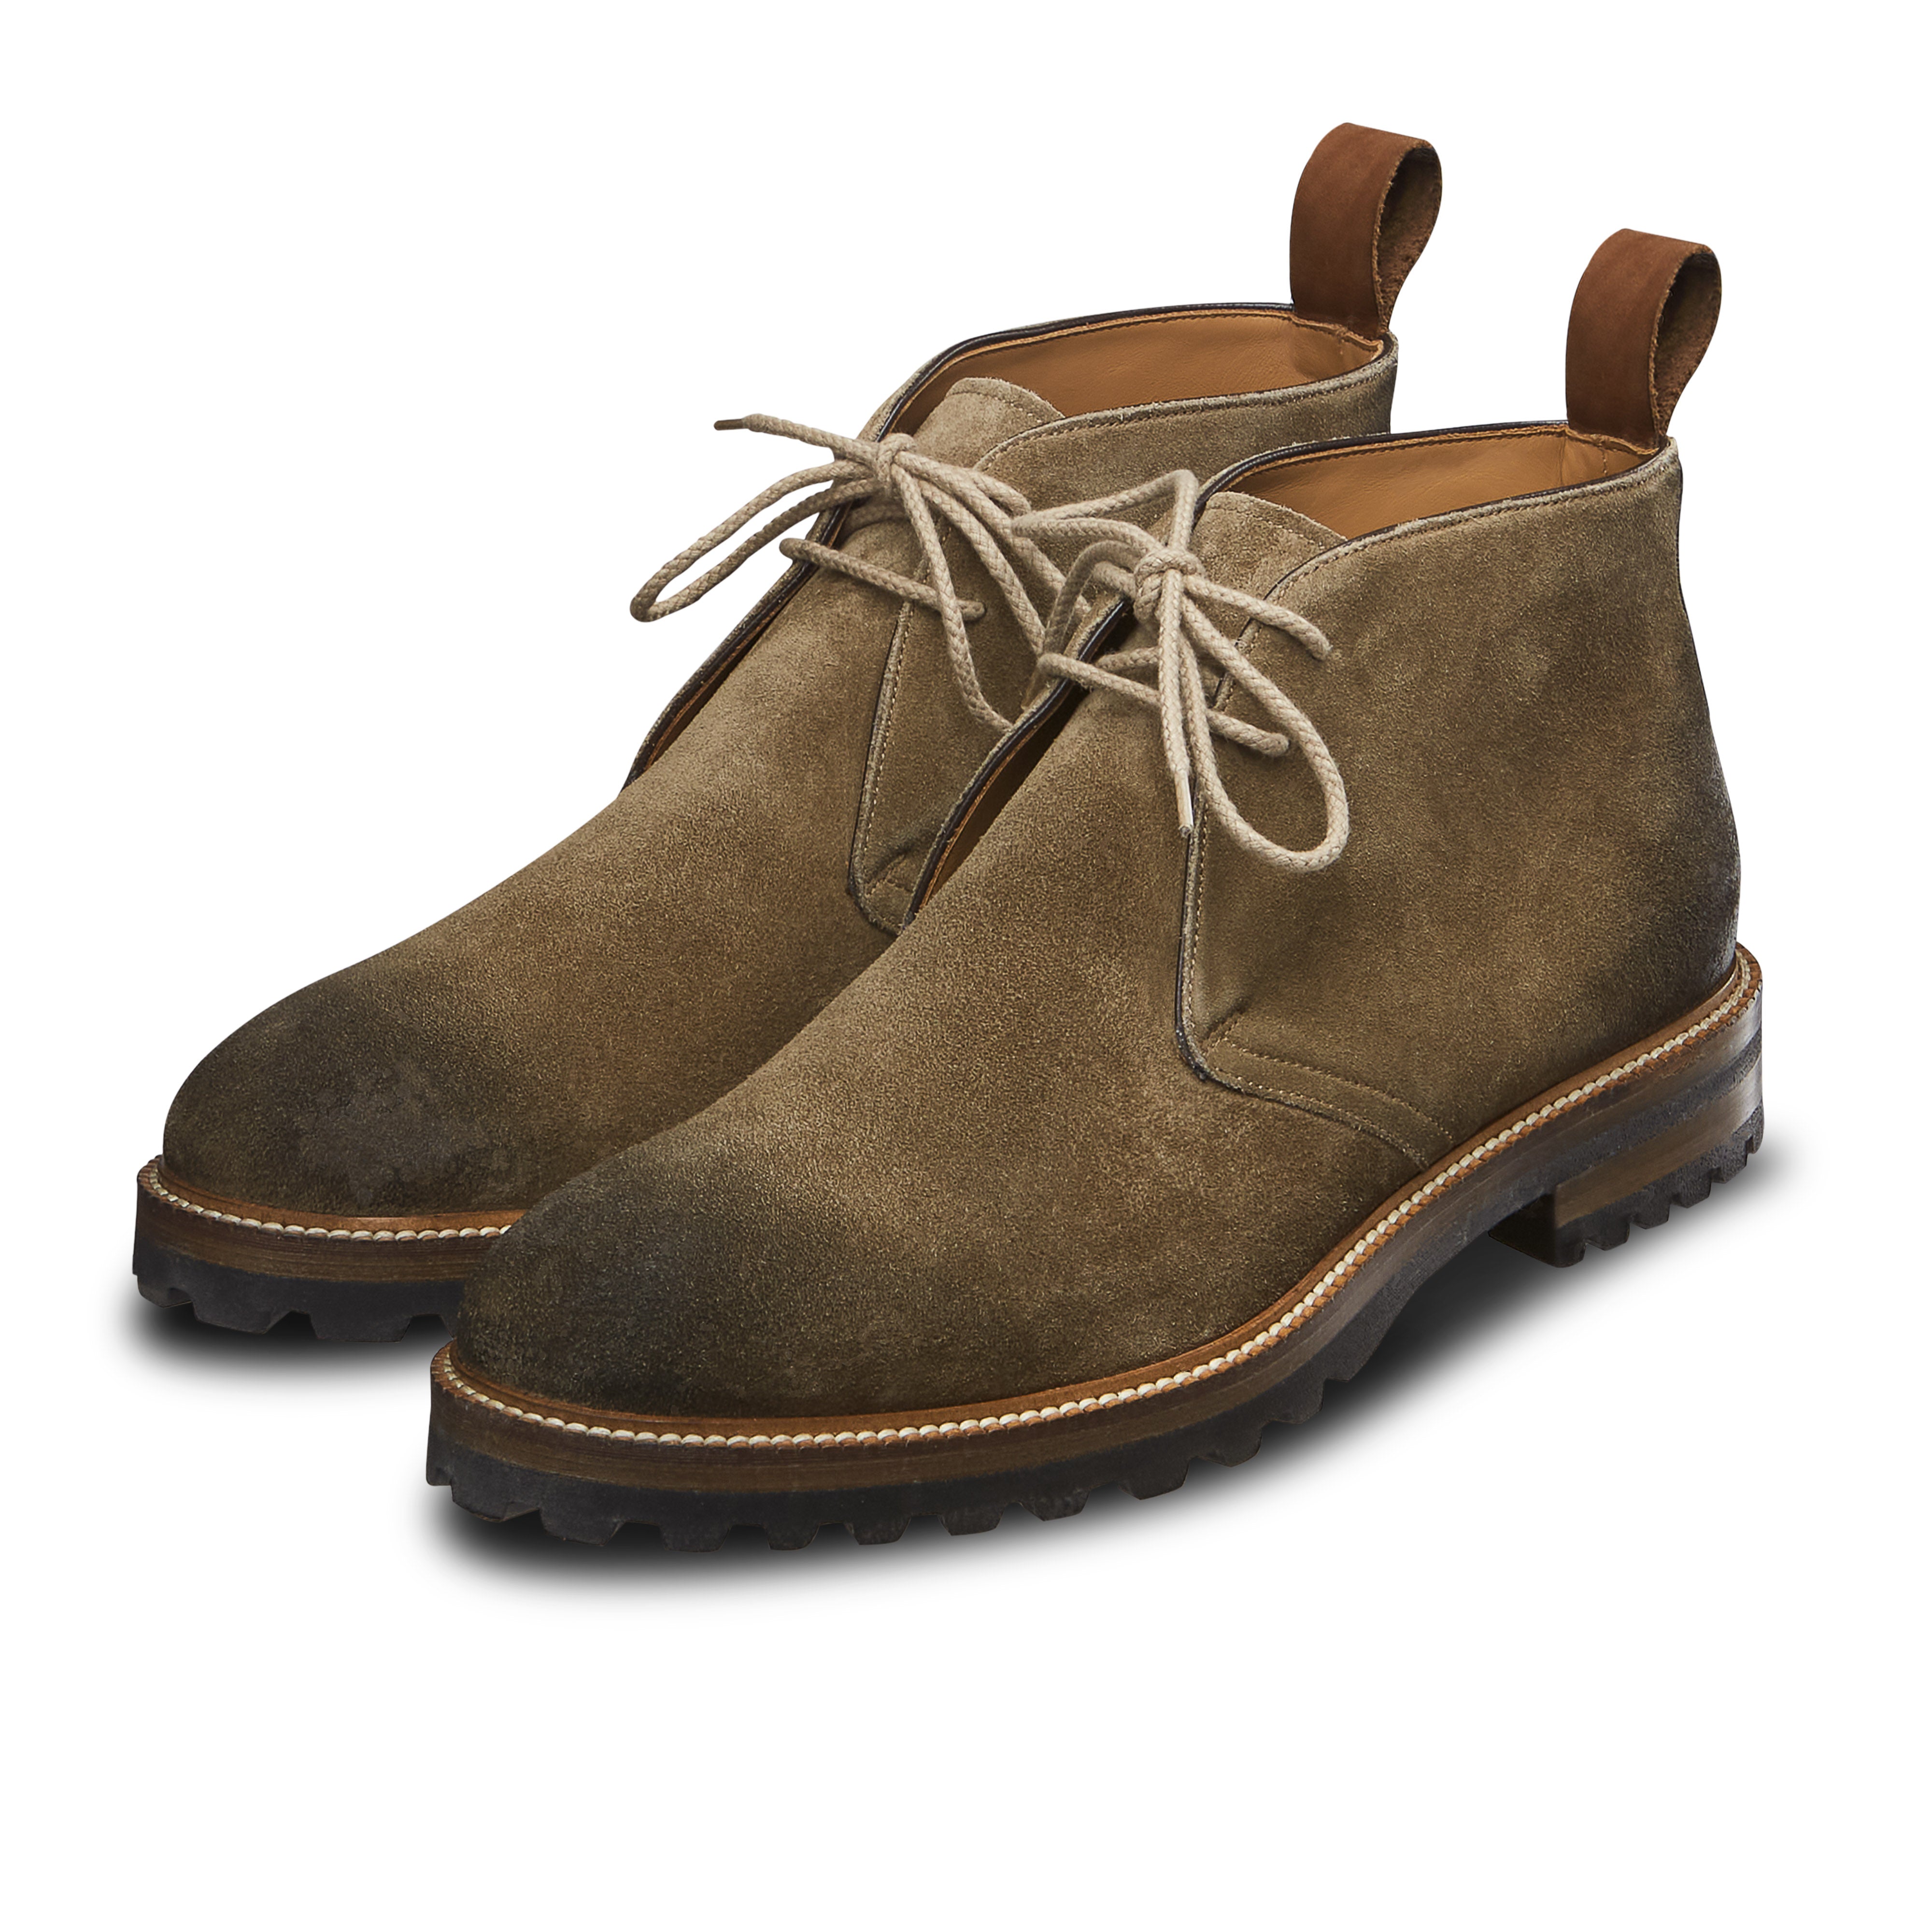 Desert Boots Firmo 393 veau velours sable - 40 / Taupe